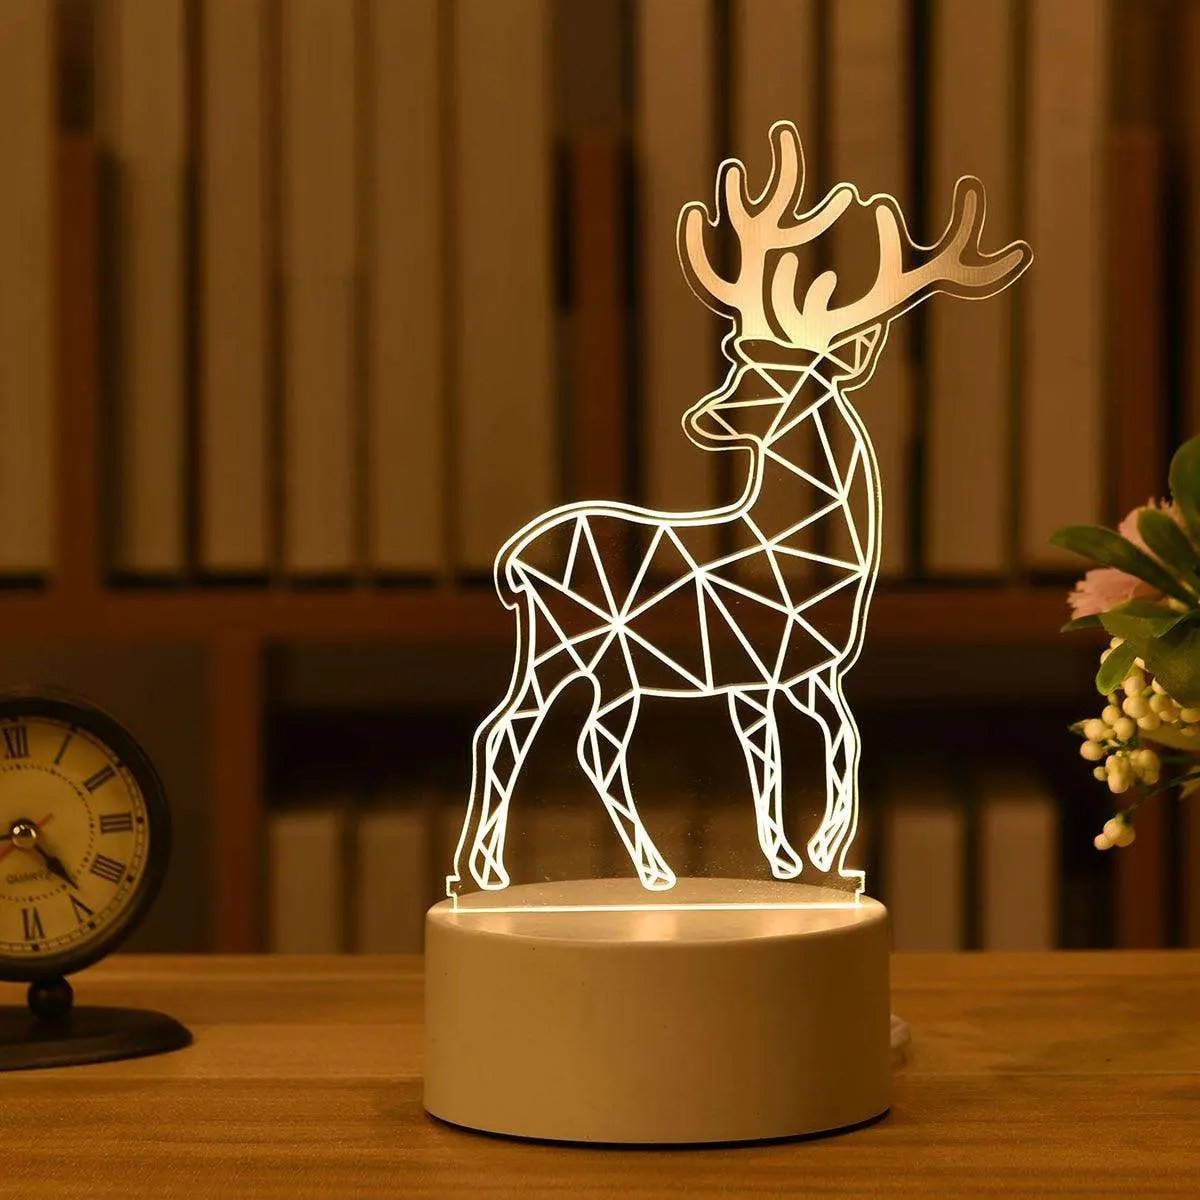 a light up deer on a table next to a clock